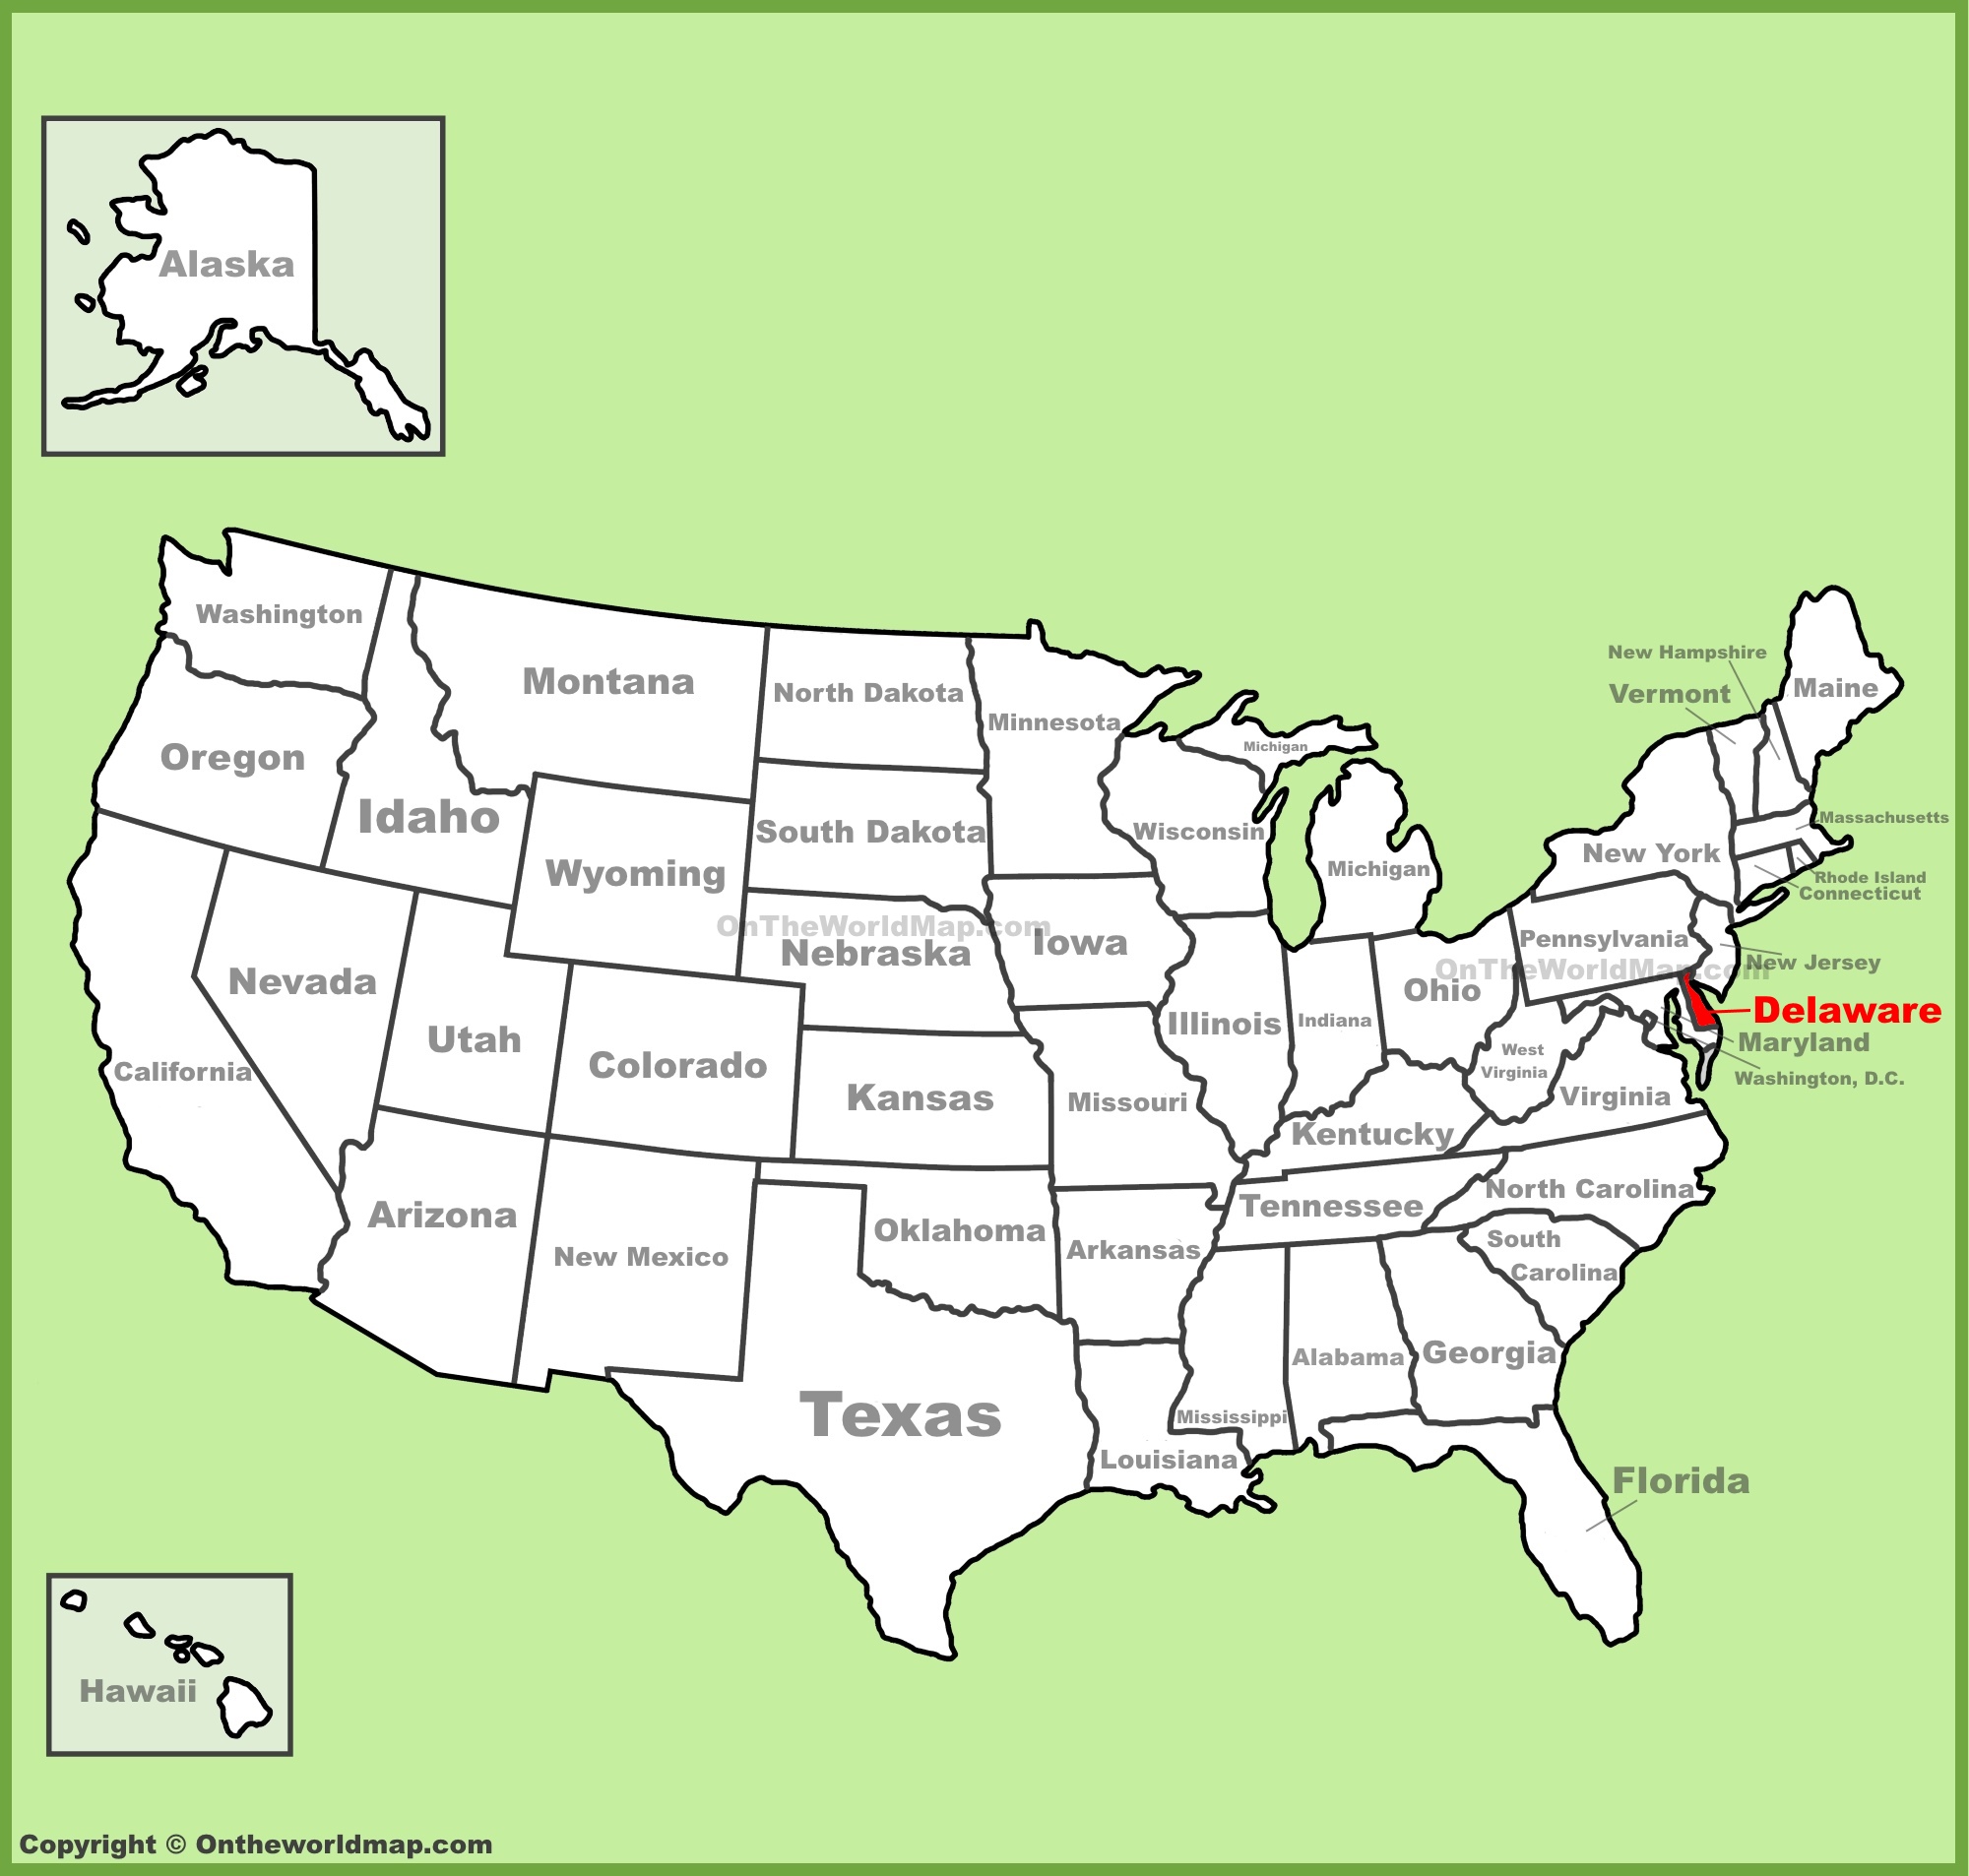 Delaware Location On The U S Map